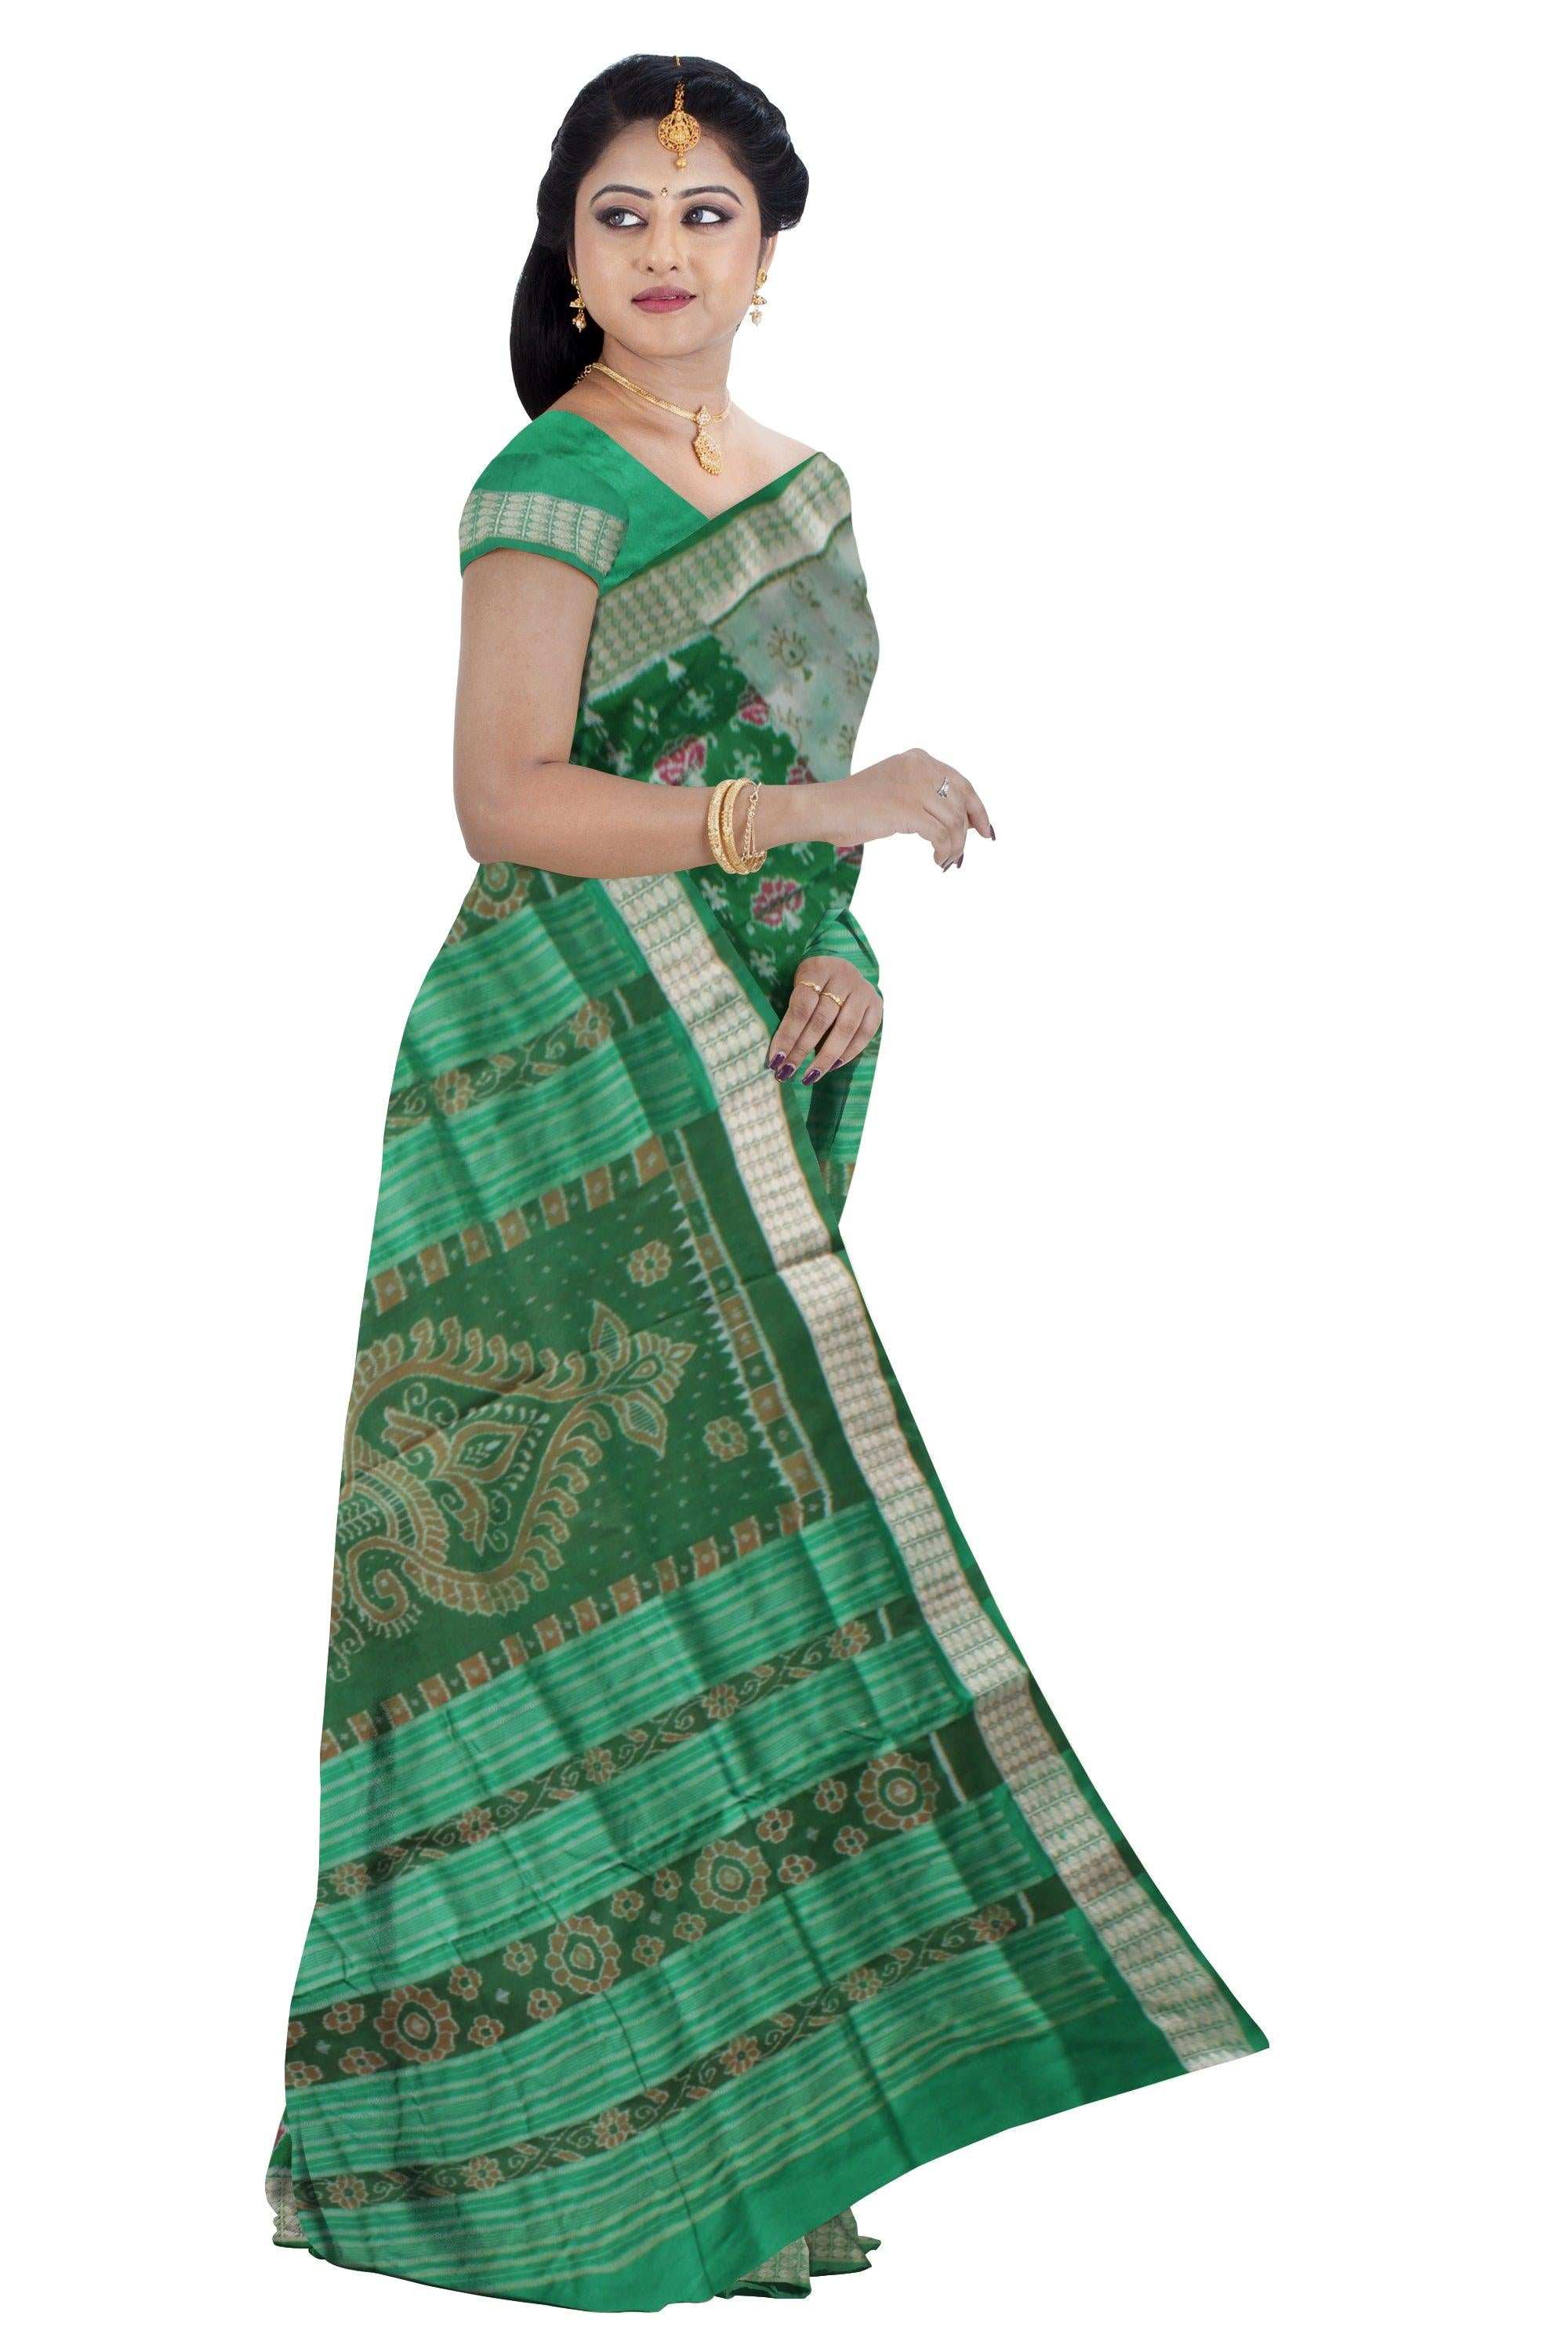 GREEN AND SILVER COLOR TERRACOTTA PATTERN PATA SAREE, WITH MATCHING BLOUSE PIECE. - Koshali Arts & Crafts Enterprise